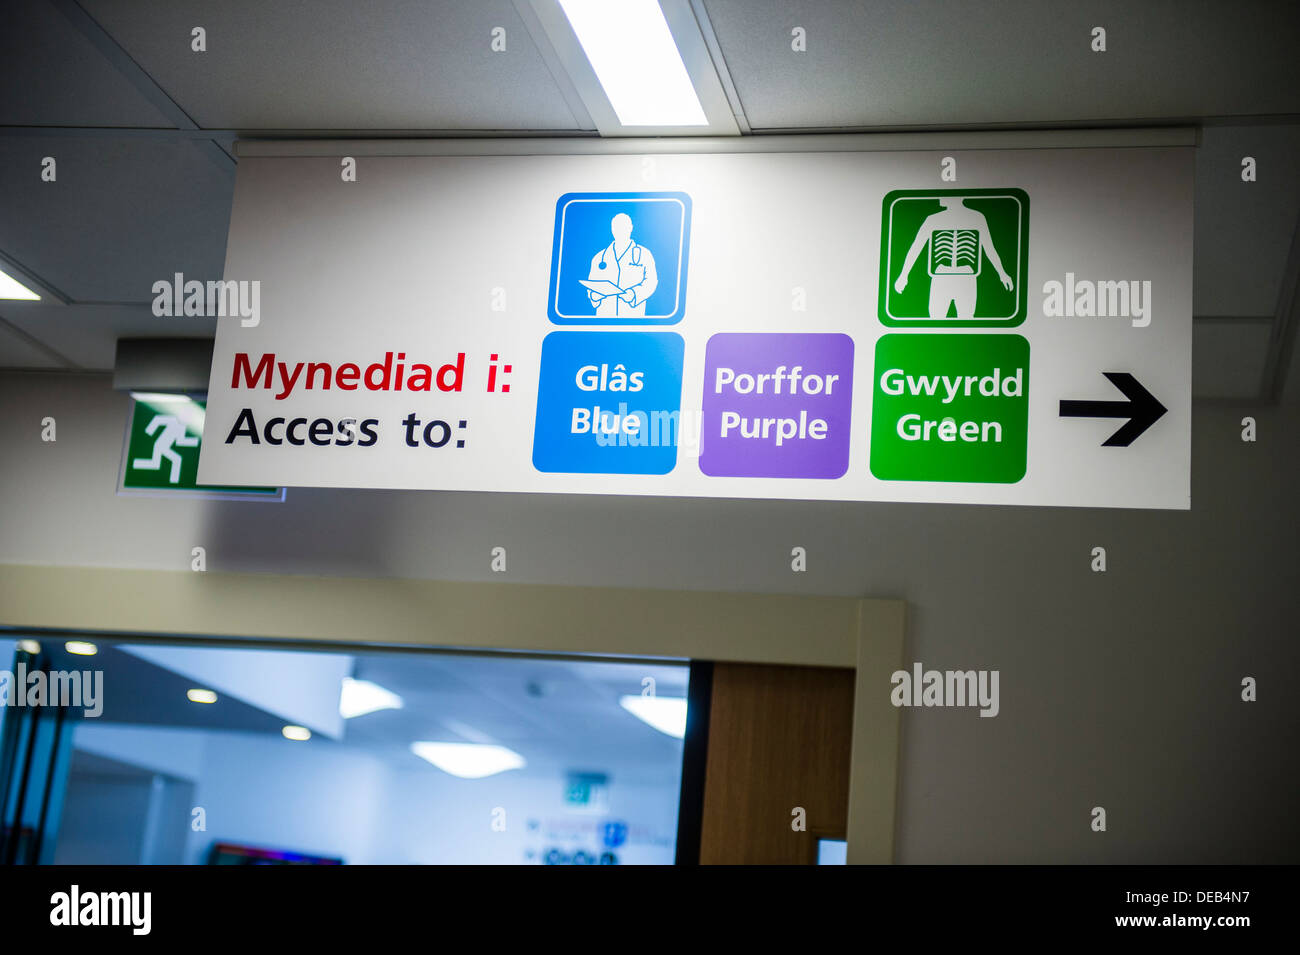 Bilingual welsh english signage in a NHS national health service hospital., Wales UK Stock Photo